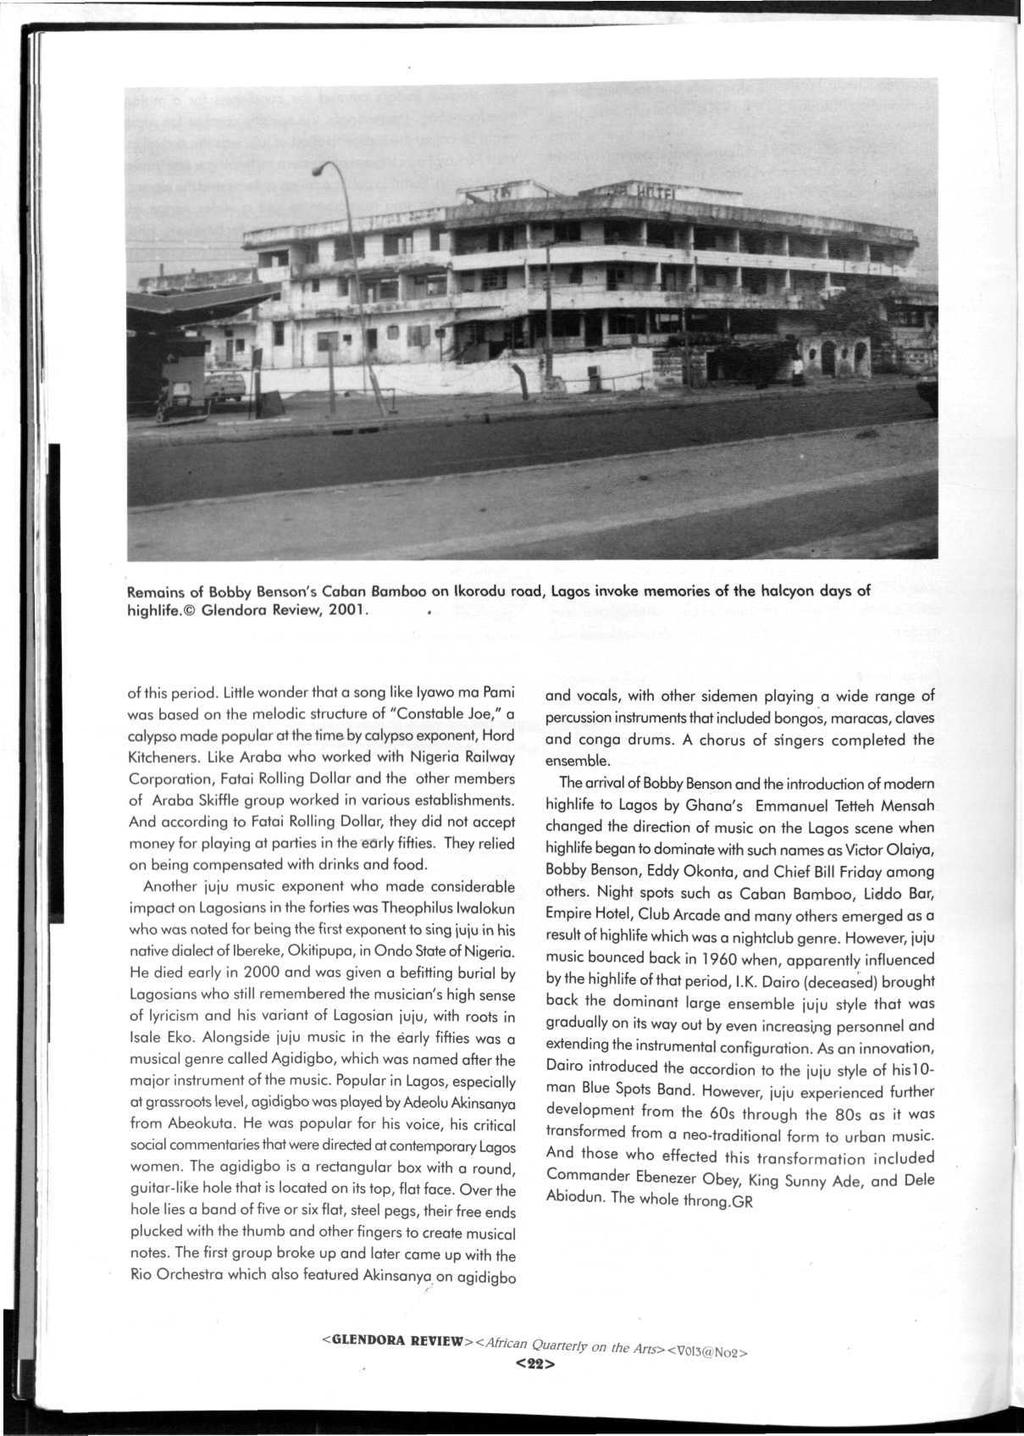 Remains of Bobby Benson's Caban Bamboo on Ikorodu road, Lagos invoke memories of the halcyon days of highlife. Glendora Review, 2001. of this period.